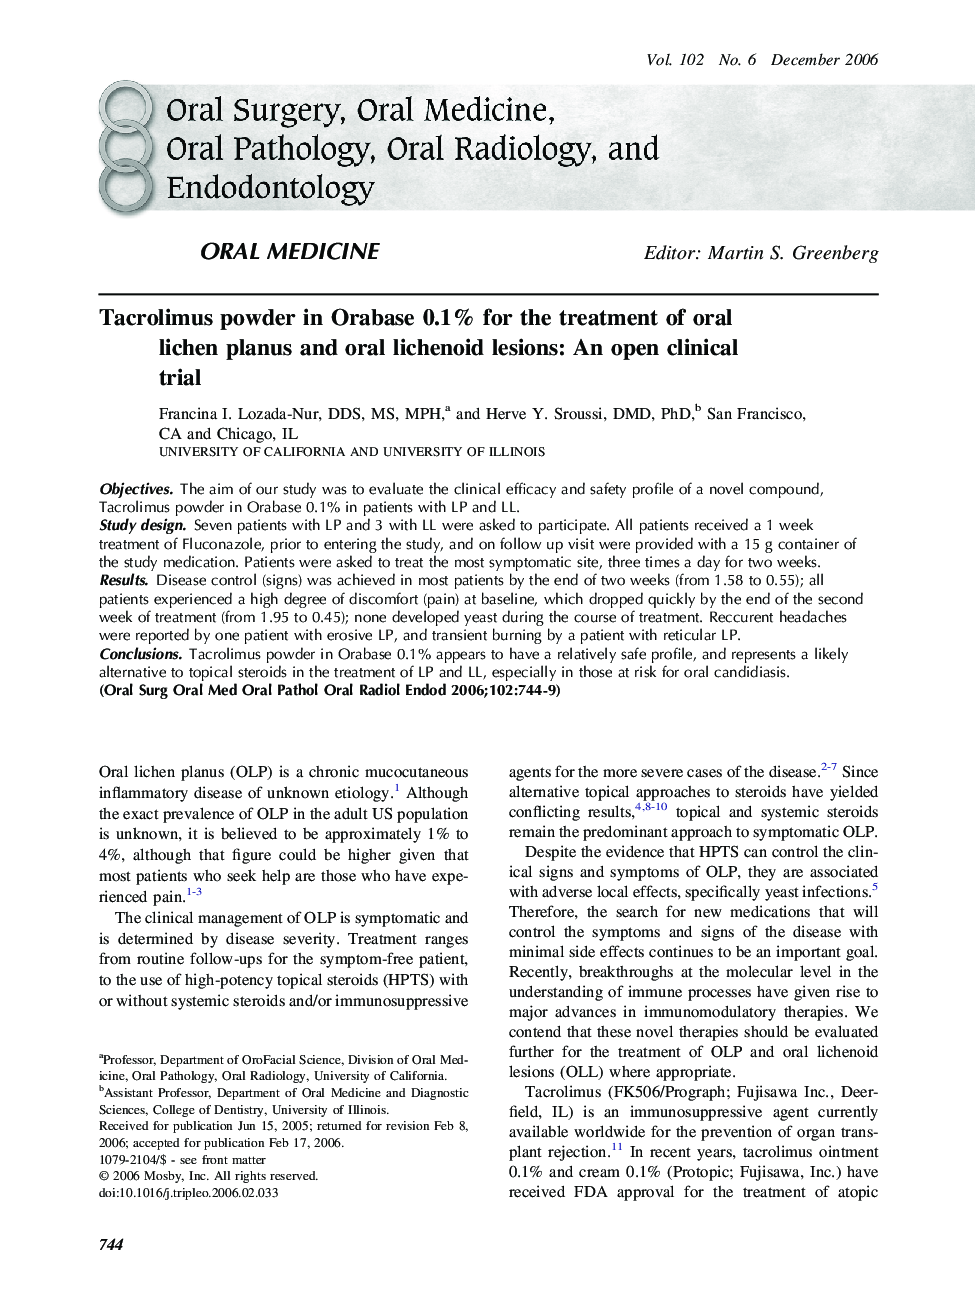 Tacrolimus powder in Orabase 0.1% for the treatment of oral lichen planus and oral lichenoid lesions: An open clinical trial